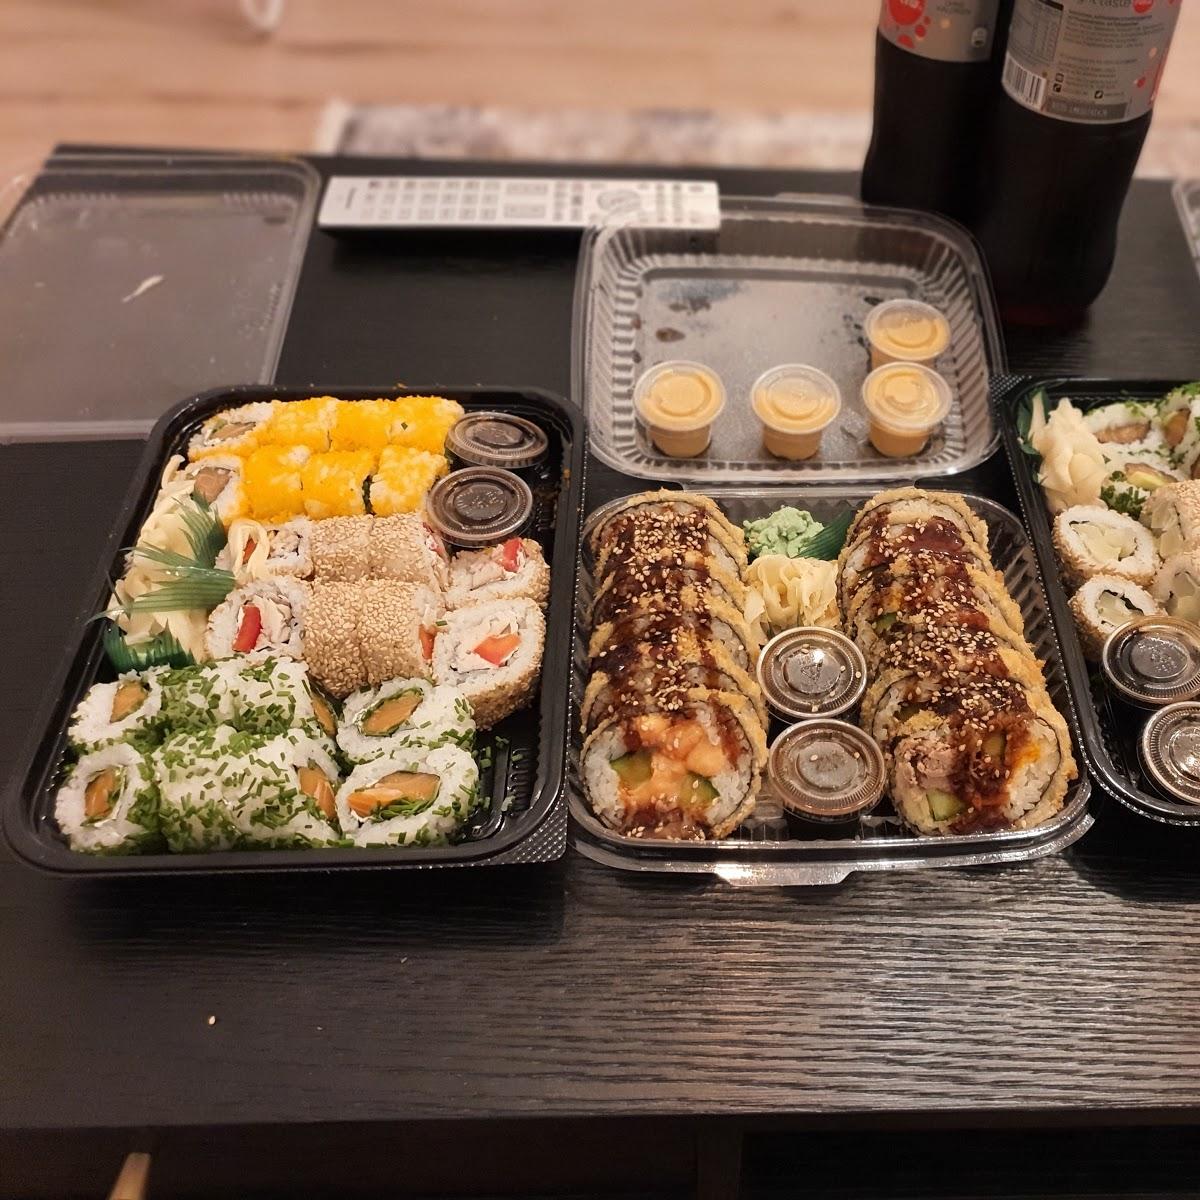 Restaurant "Sushi For You" in Berlin